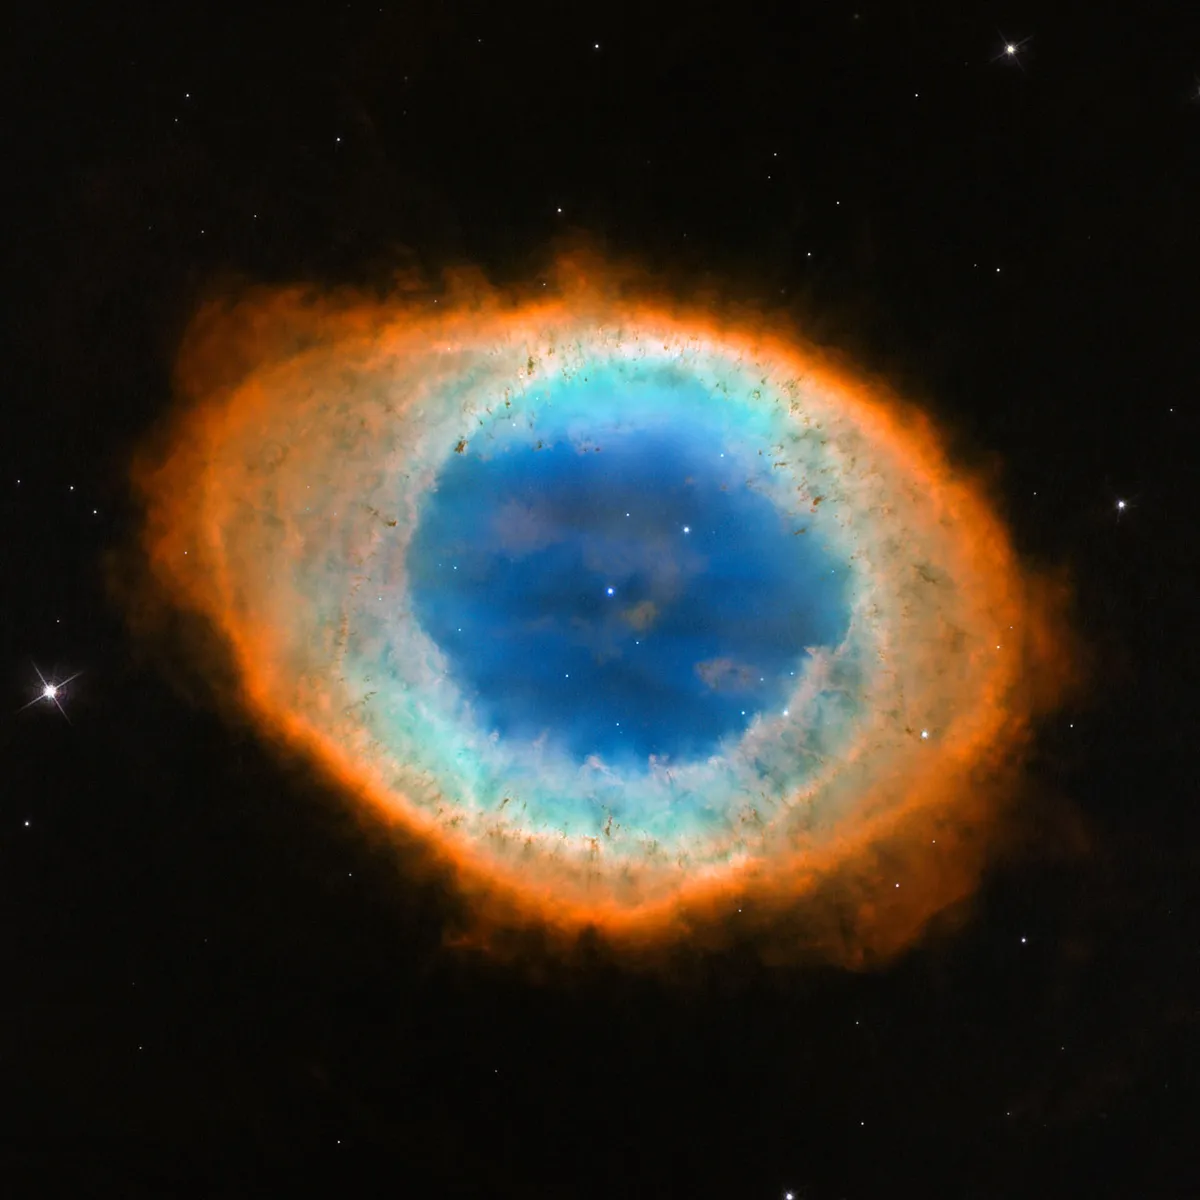 This new image shows the dramatic shape and colour of the Ring Nebula, otherwise known as Messier 57. From Earth’s perspective, the nebula looks like a simple elliptical shape with a shaggy boundary. However, new observations combining existing ground-based data with new NASA/ESA Hubble Space Telescope data show that the nebula is shaped like a distorted doughnut. This doughnut has a rugby-ball-shaped region of lower-density material slotted into in its central “gap”, stretching towards and away from us.